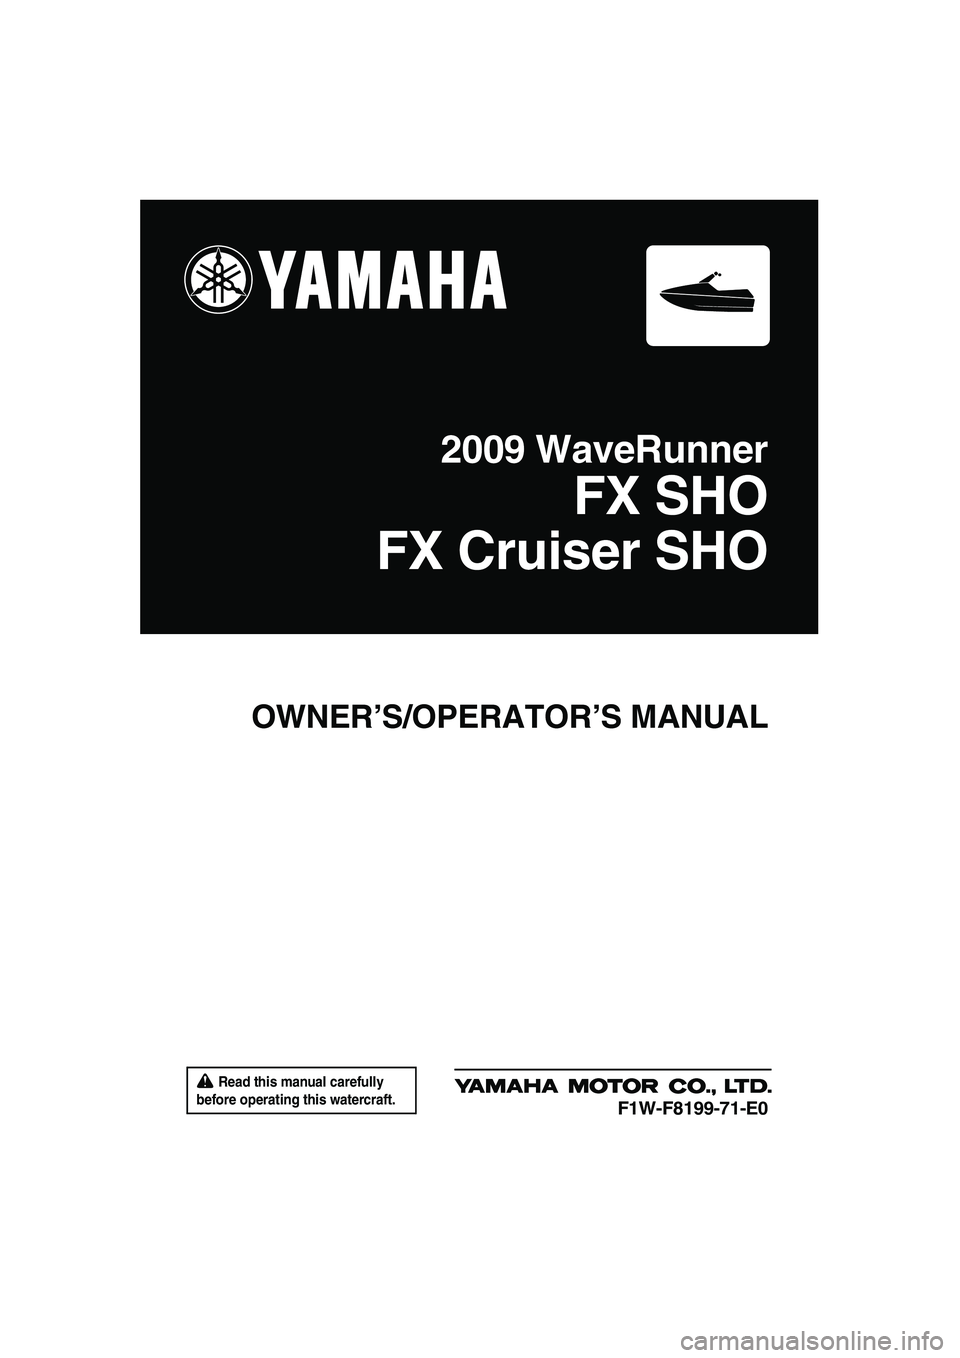 YAMAHA SVHO 2009  Owners Manual  Read this manual carefully 
before operating this watercraft.
OWNER’S/OPERATOR’S MANUAL
2009 WaveRunner
FX SHO
FX Cruiser SHO
F1W-F8199-71-E0
UF1W71E0.book  Page 1  Tuesday, June 24, 2008  11:46 